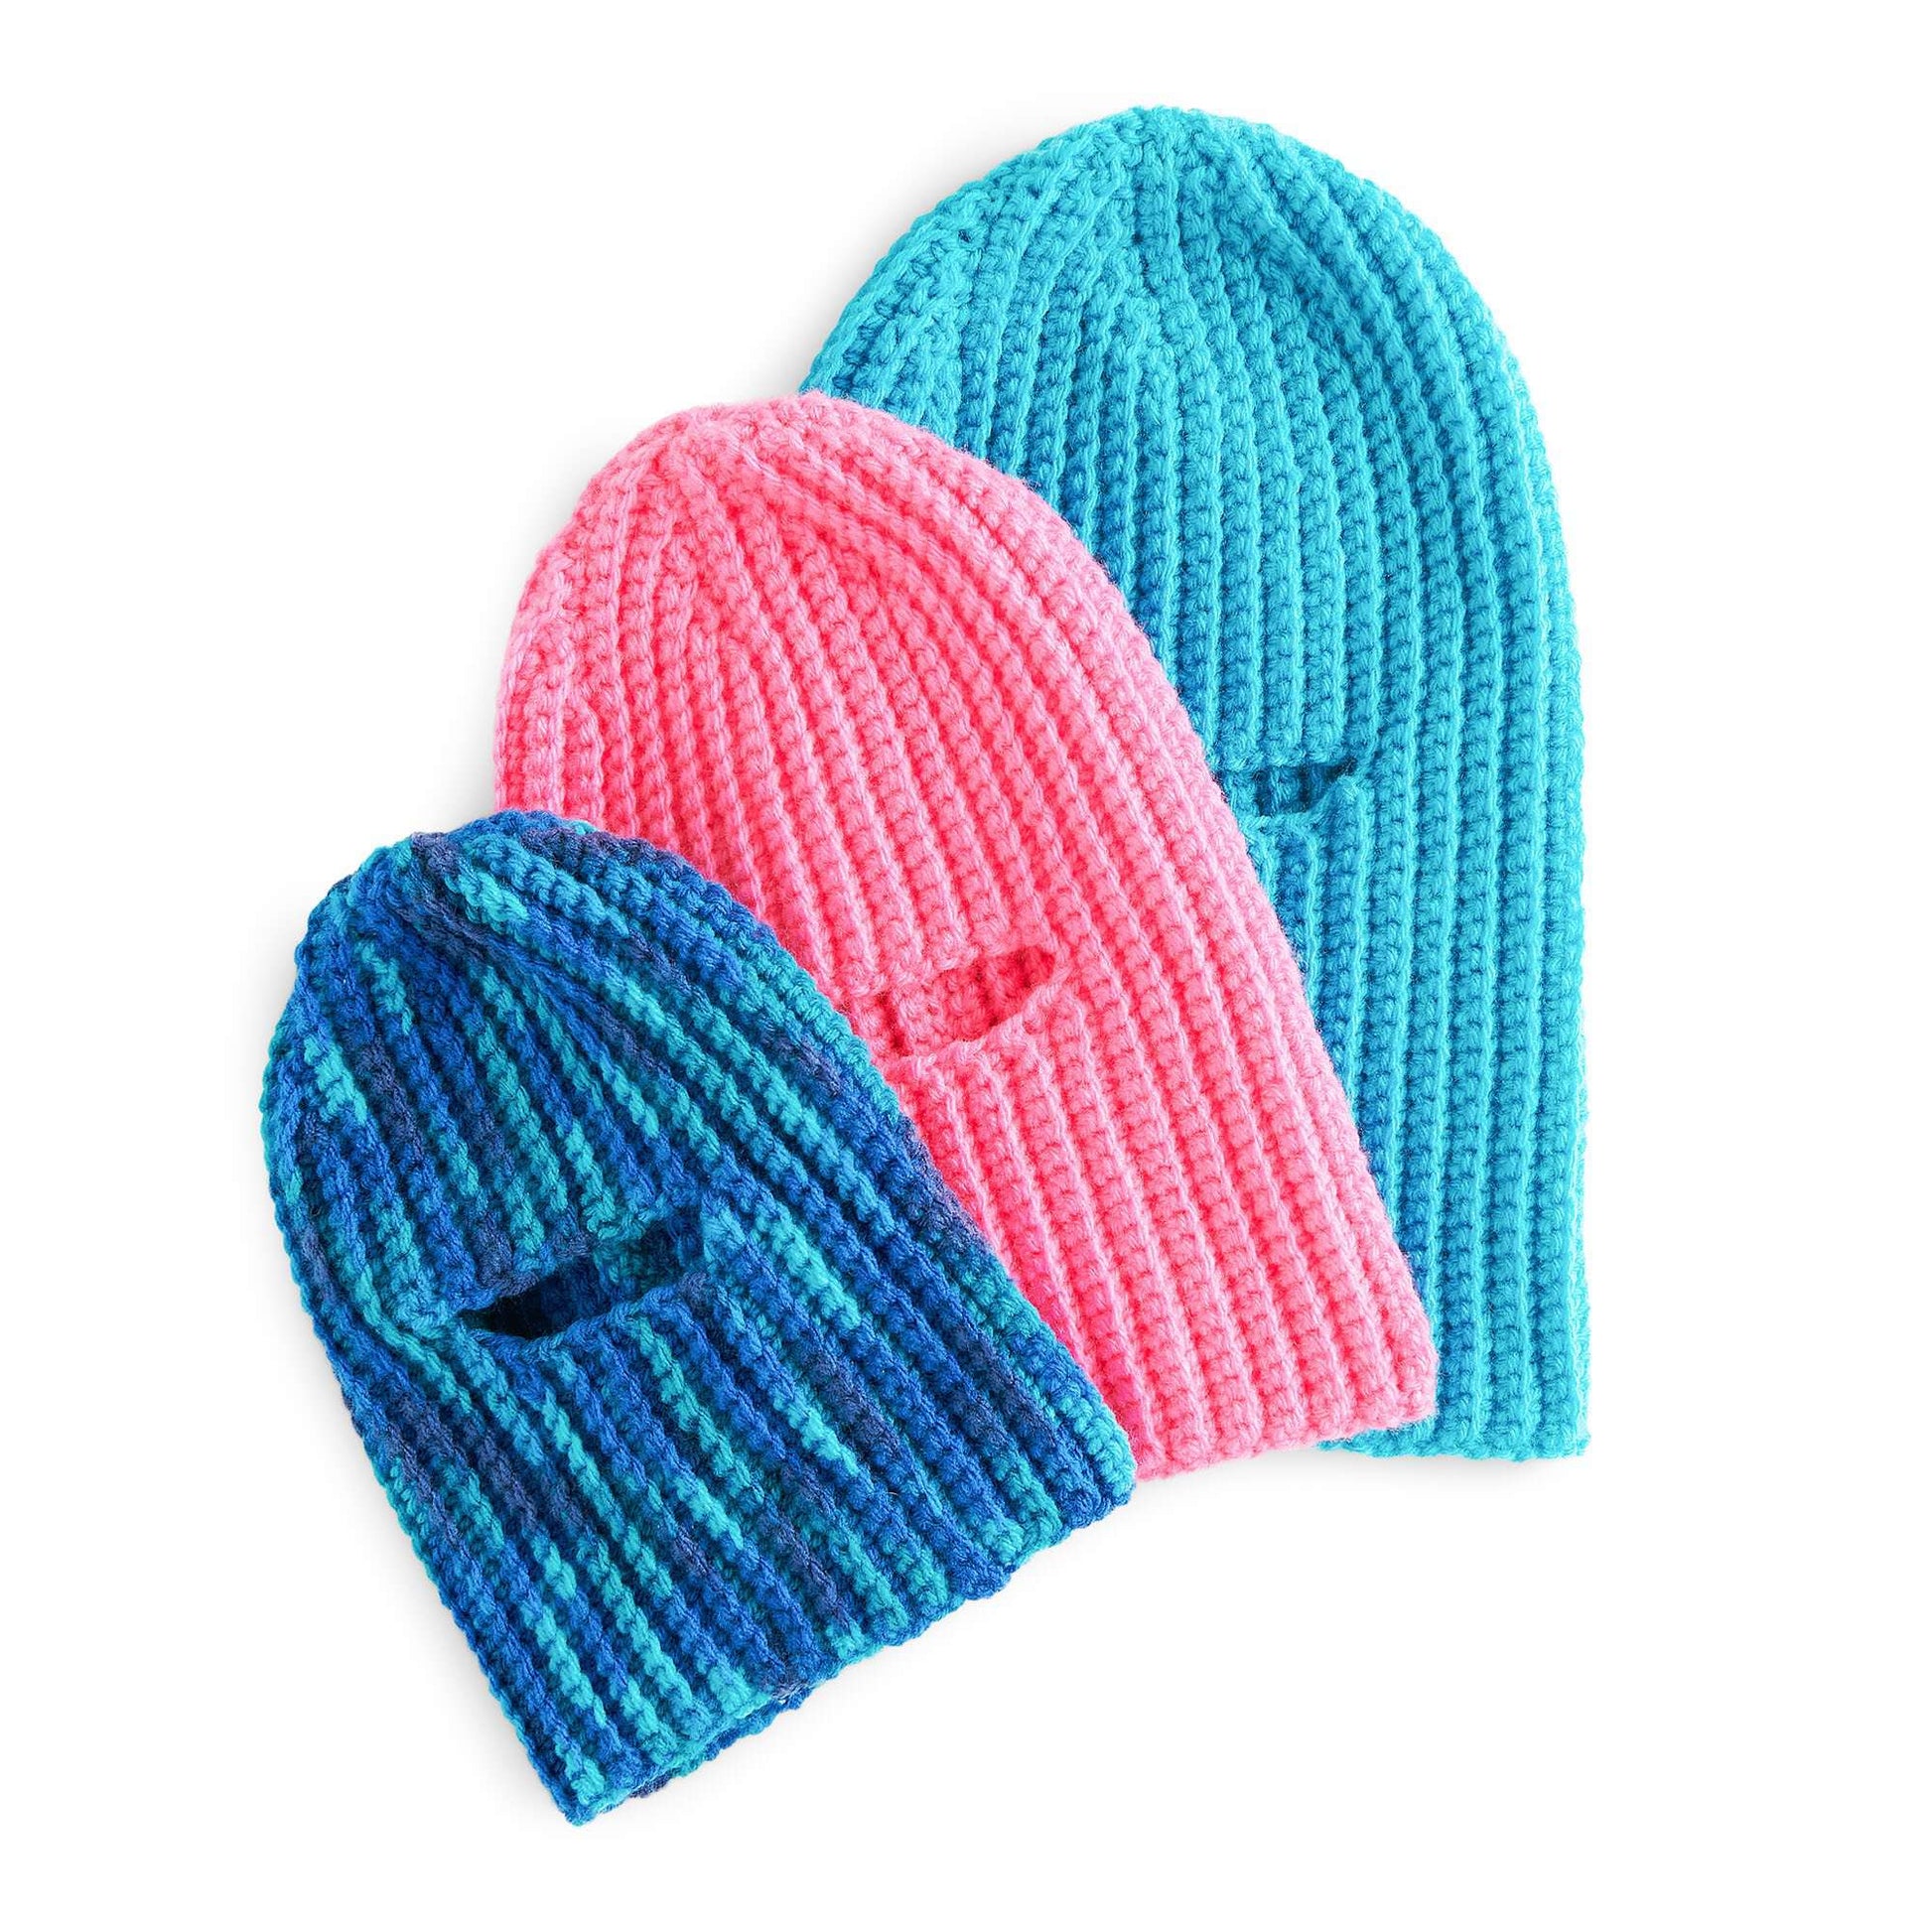 Free Red Heart Crochet Ribbed Balaclavas For All Pattern